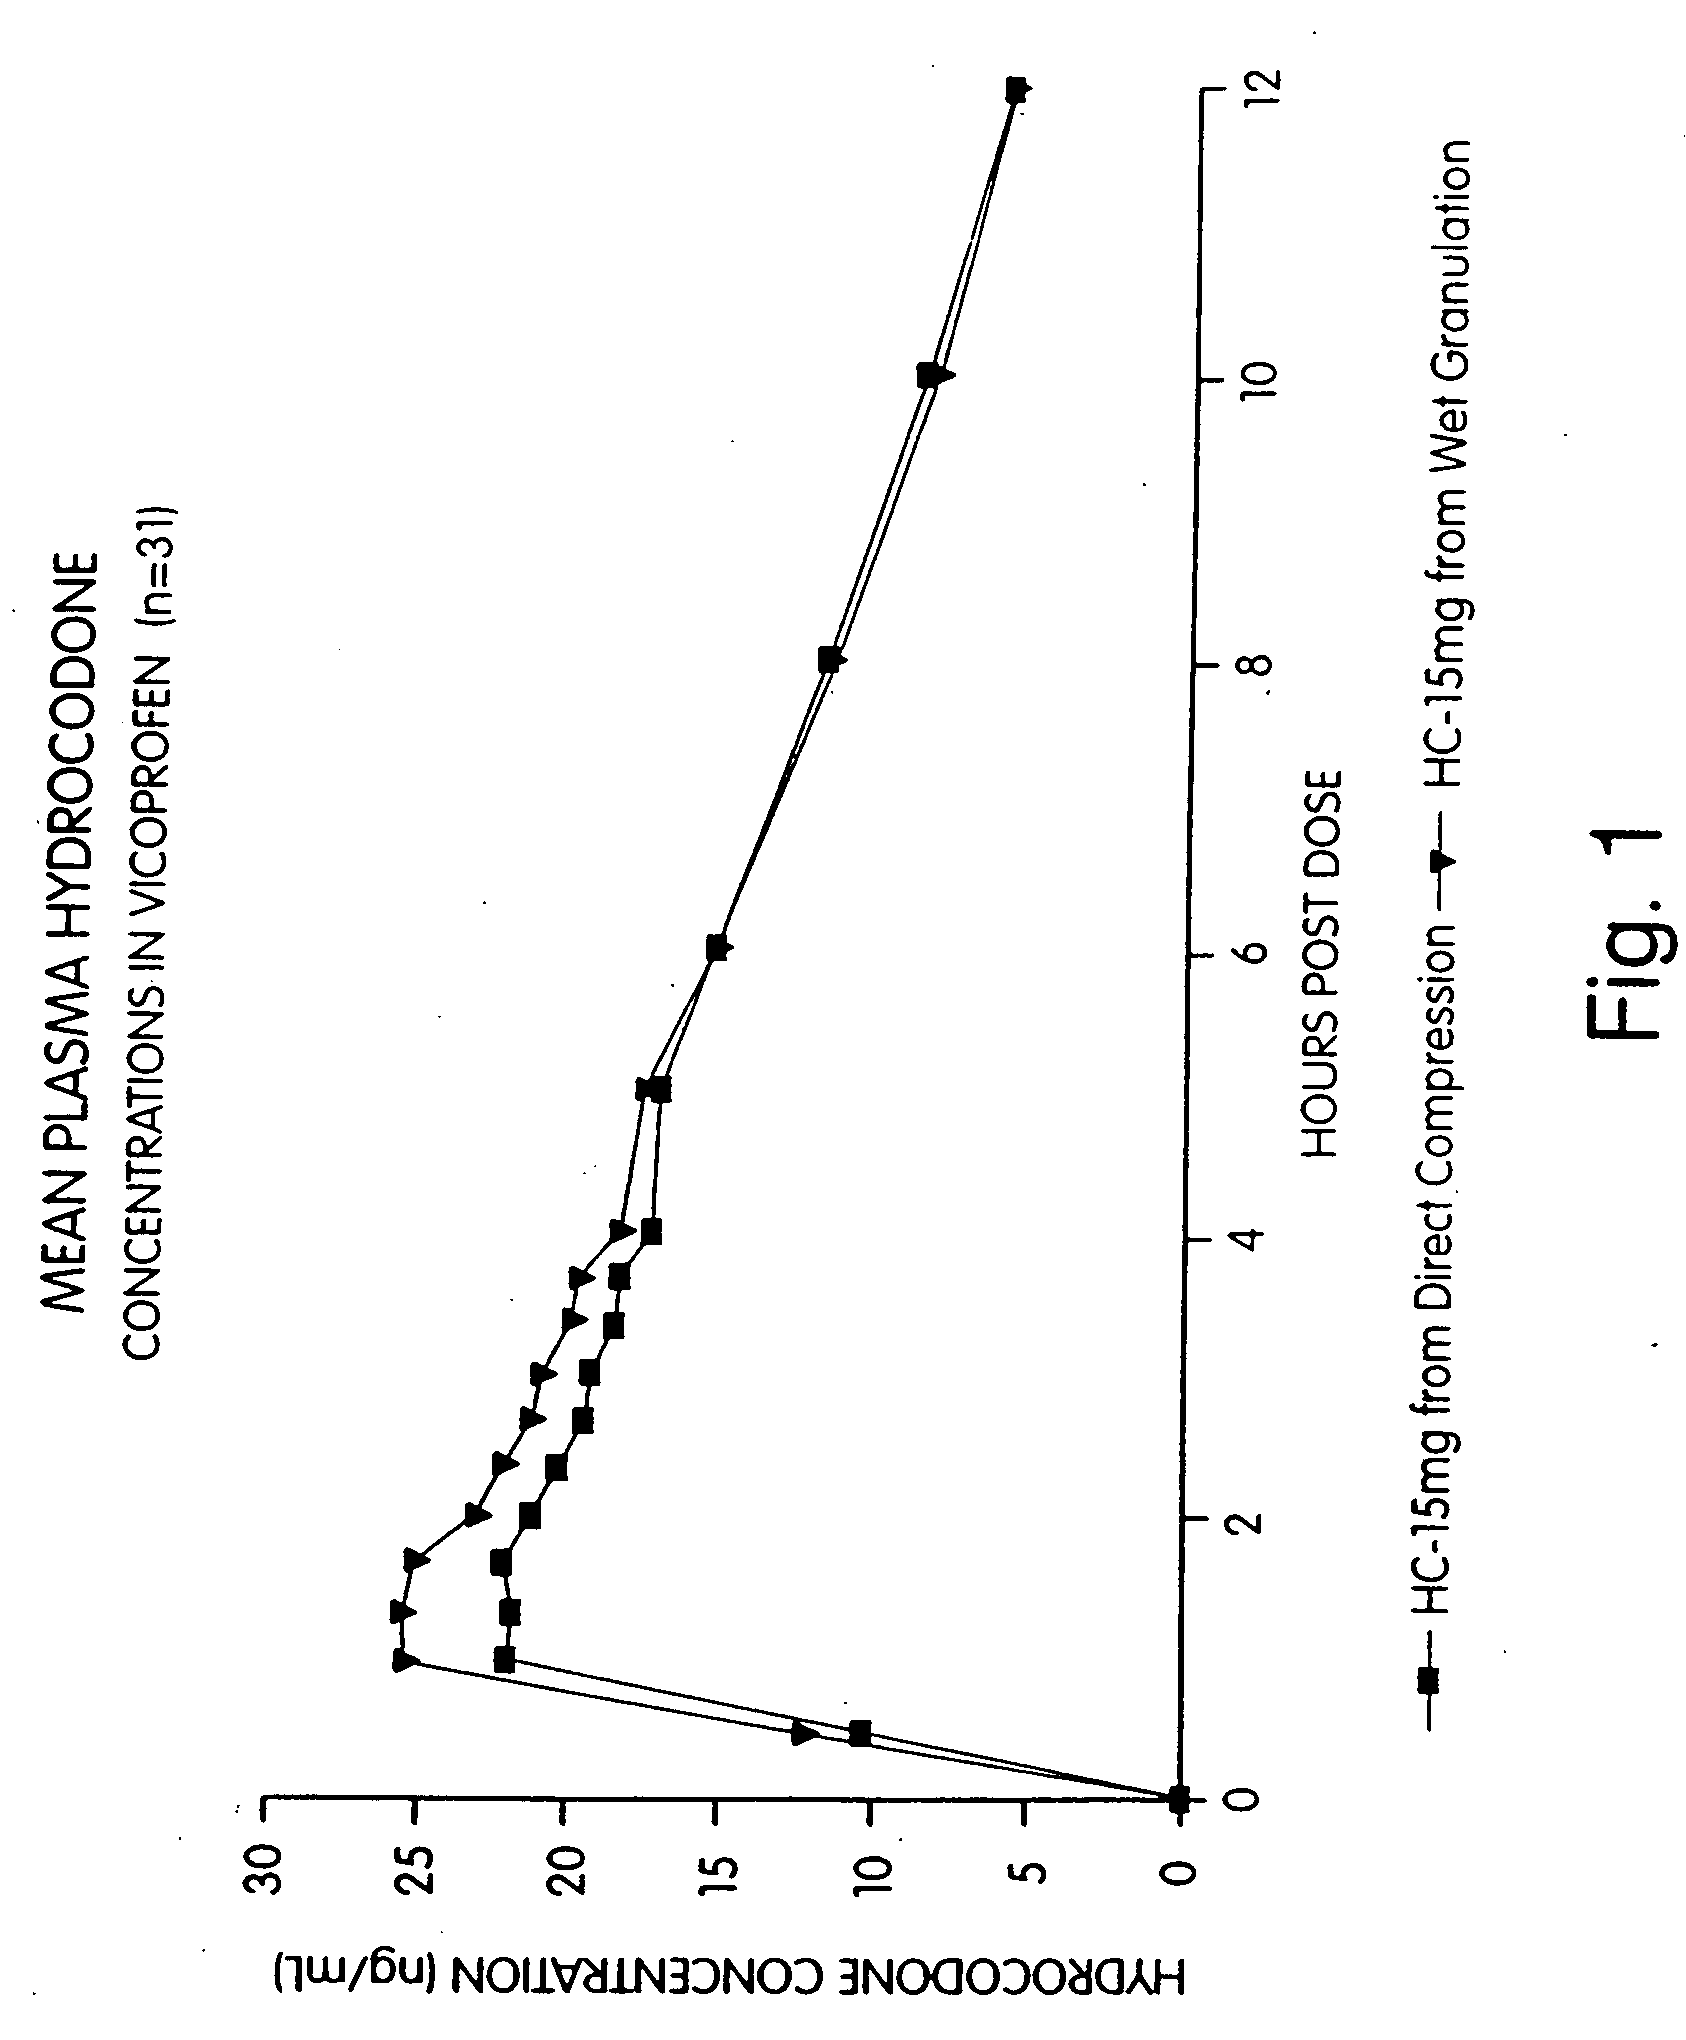 Ibuprofen and narcotic analgesic compositions